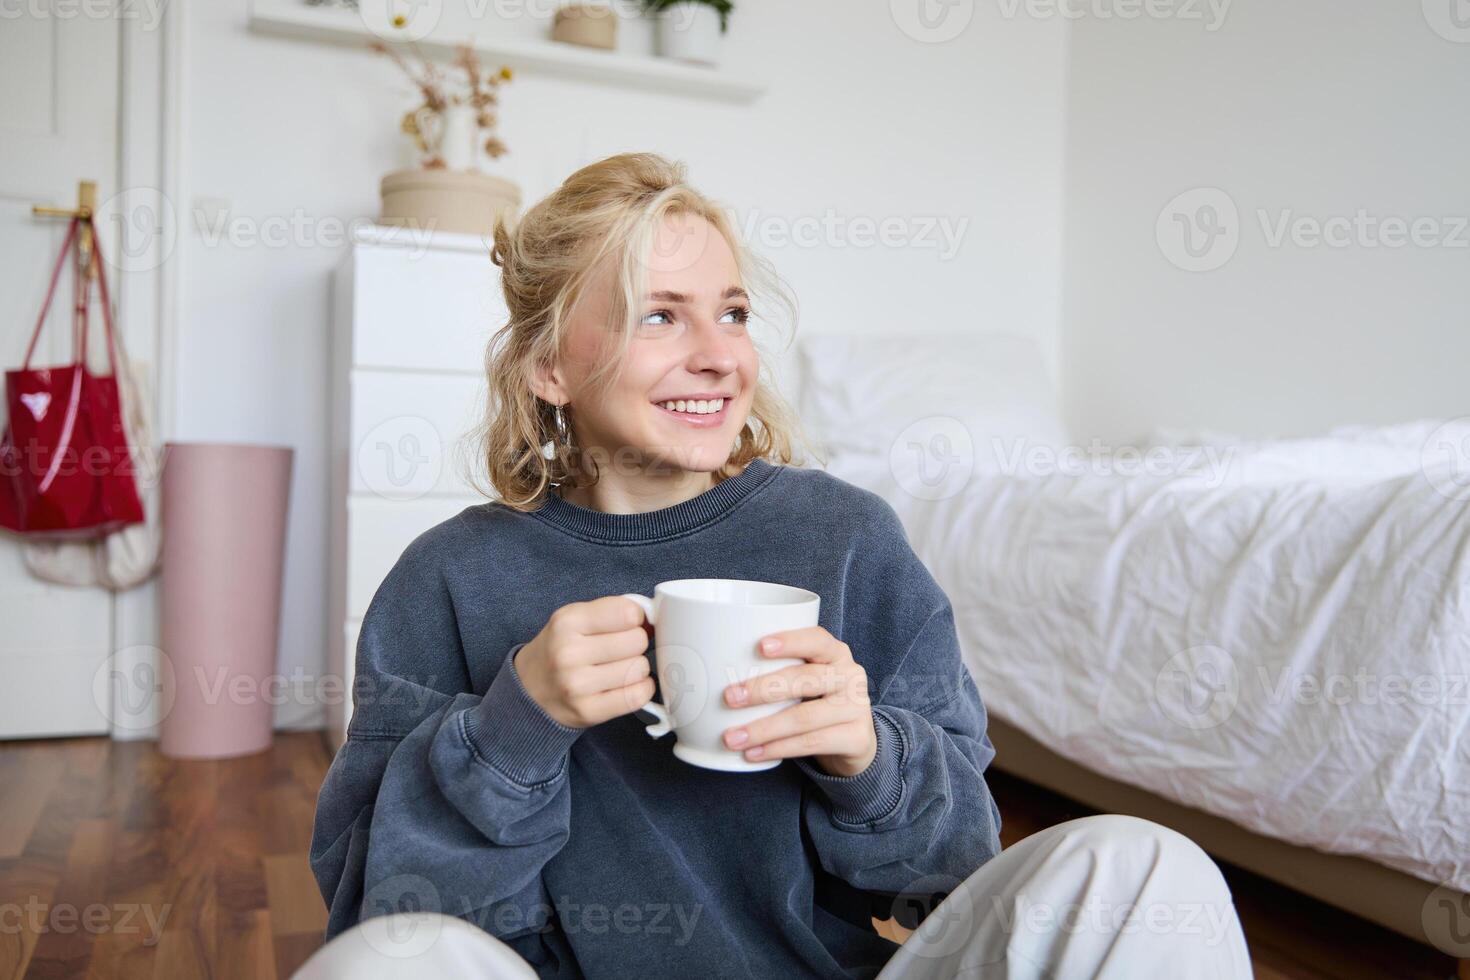 Lifestyle portrait of young woman sitting on bedroom floor with cup of tea, drinking from big white mug and looking aside, smiling happily photo